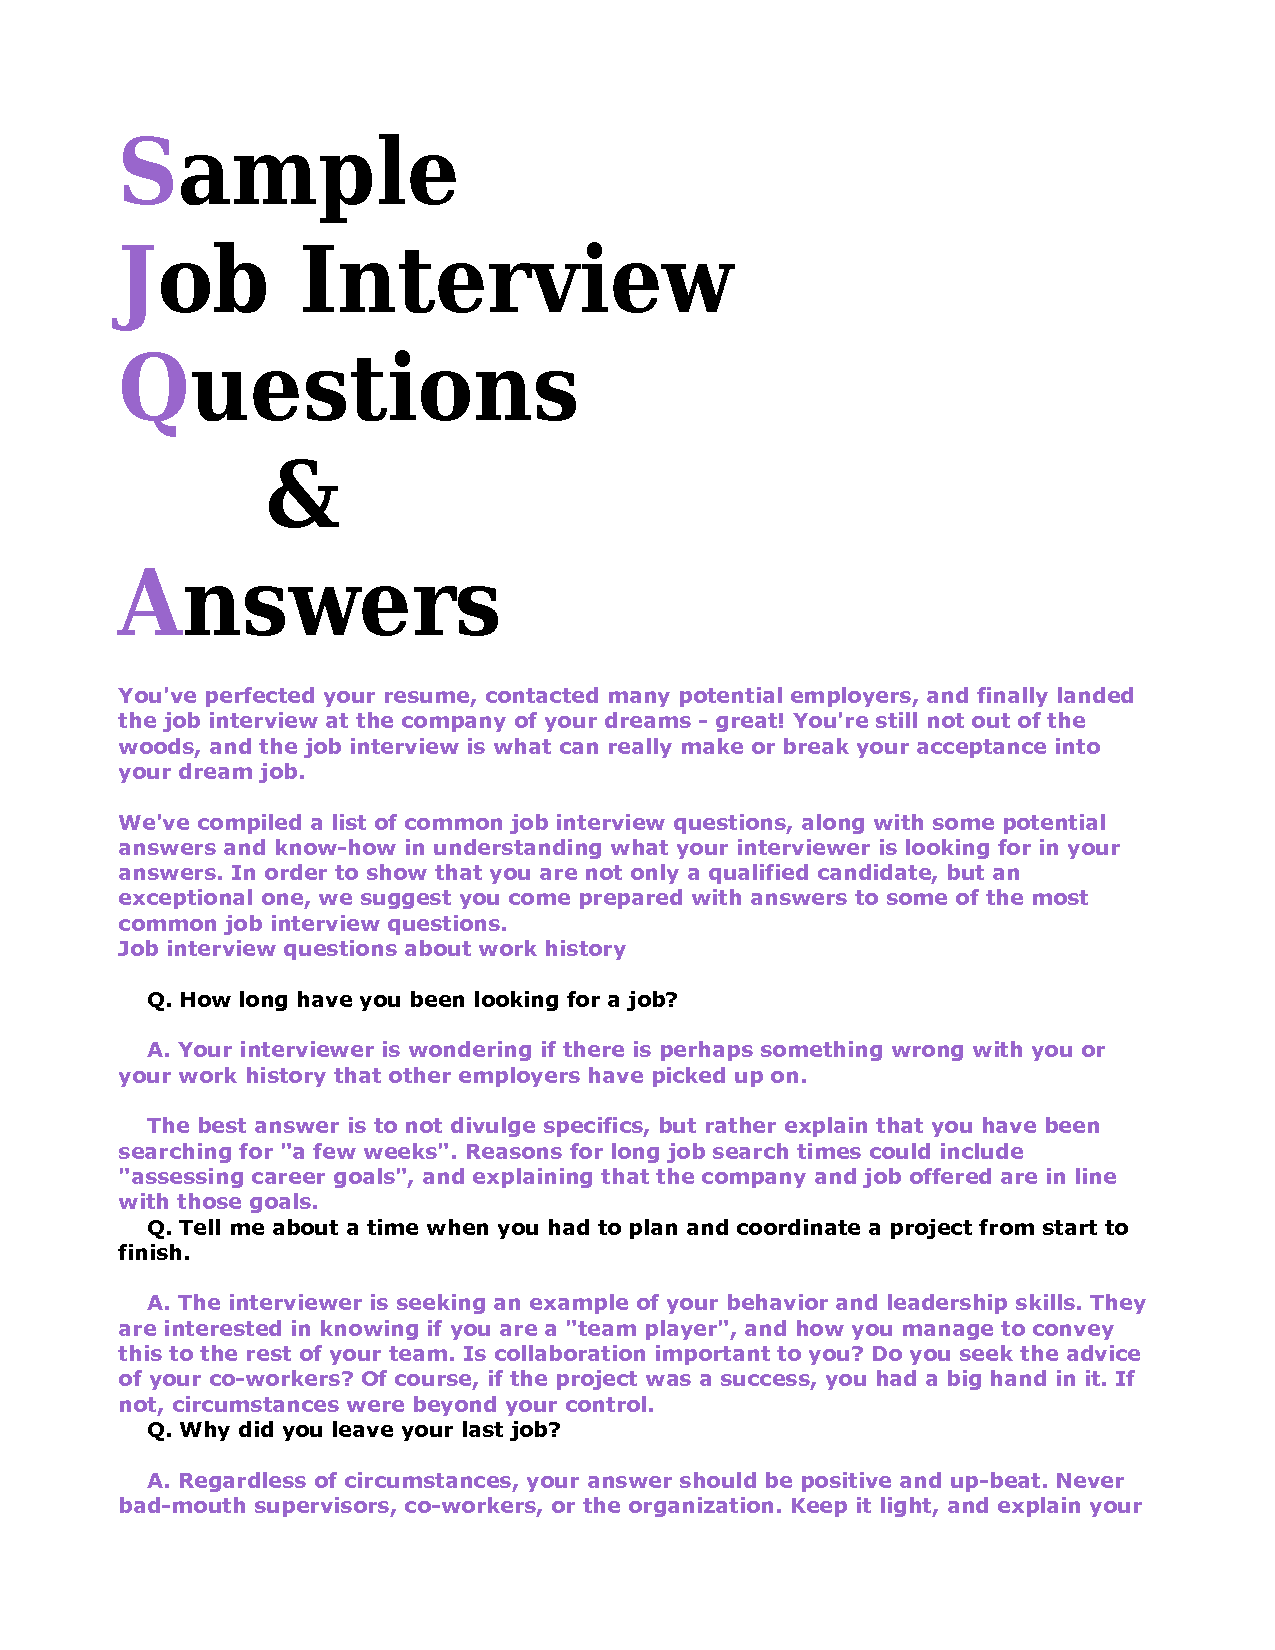 Job interview practice questions and answer